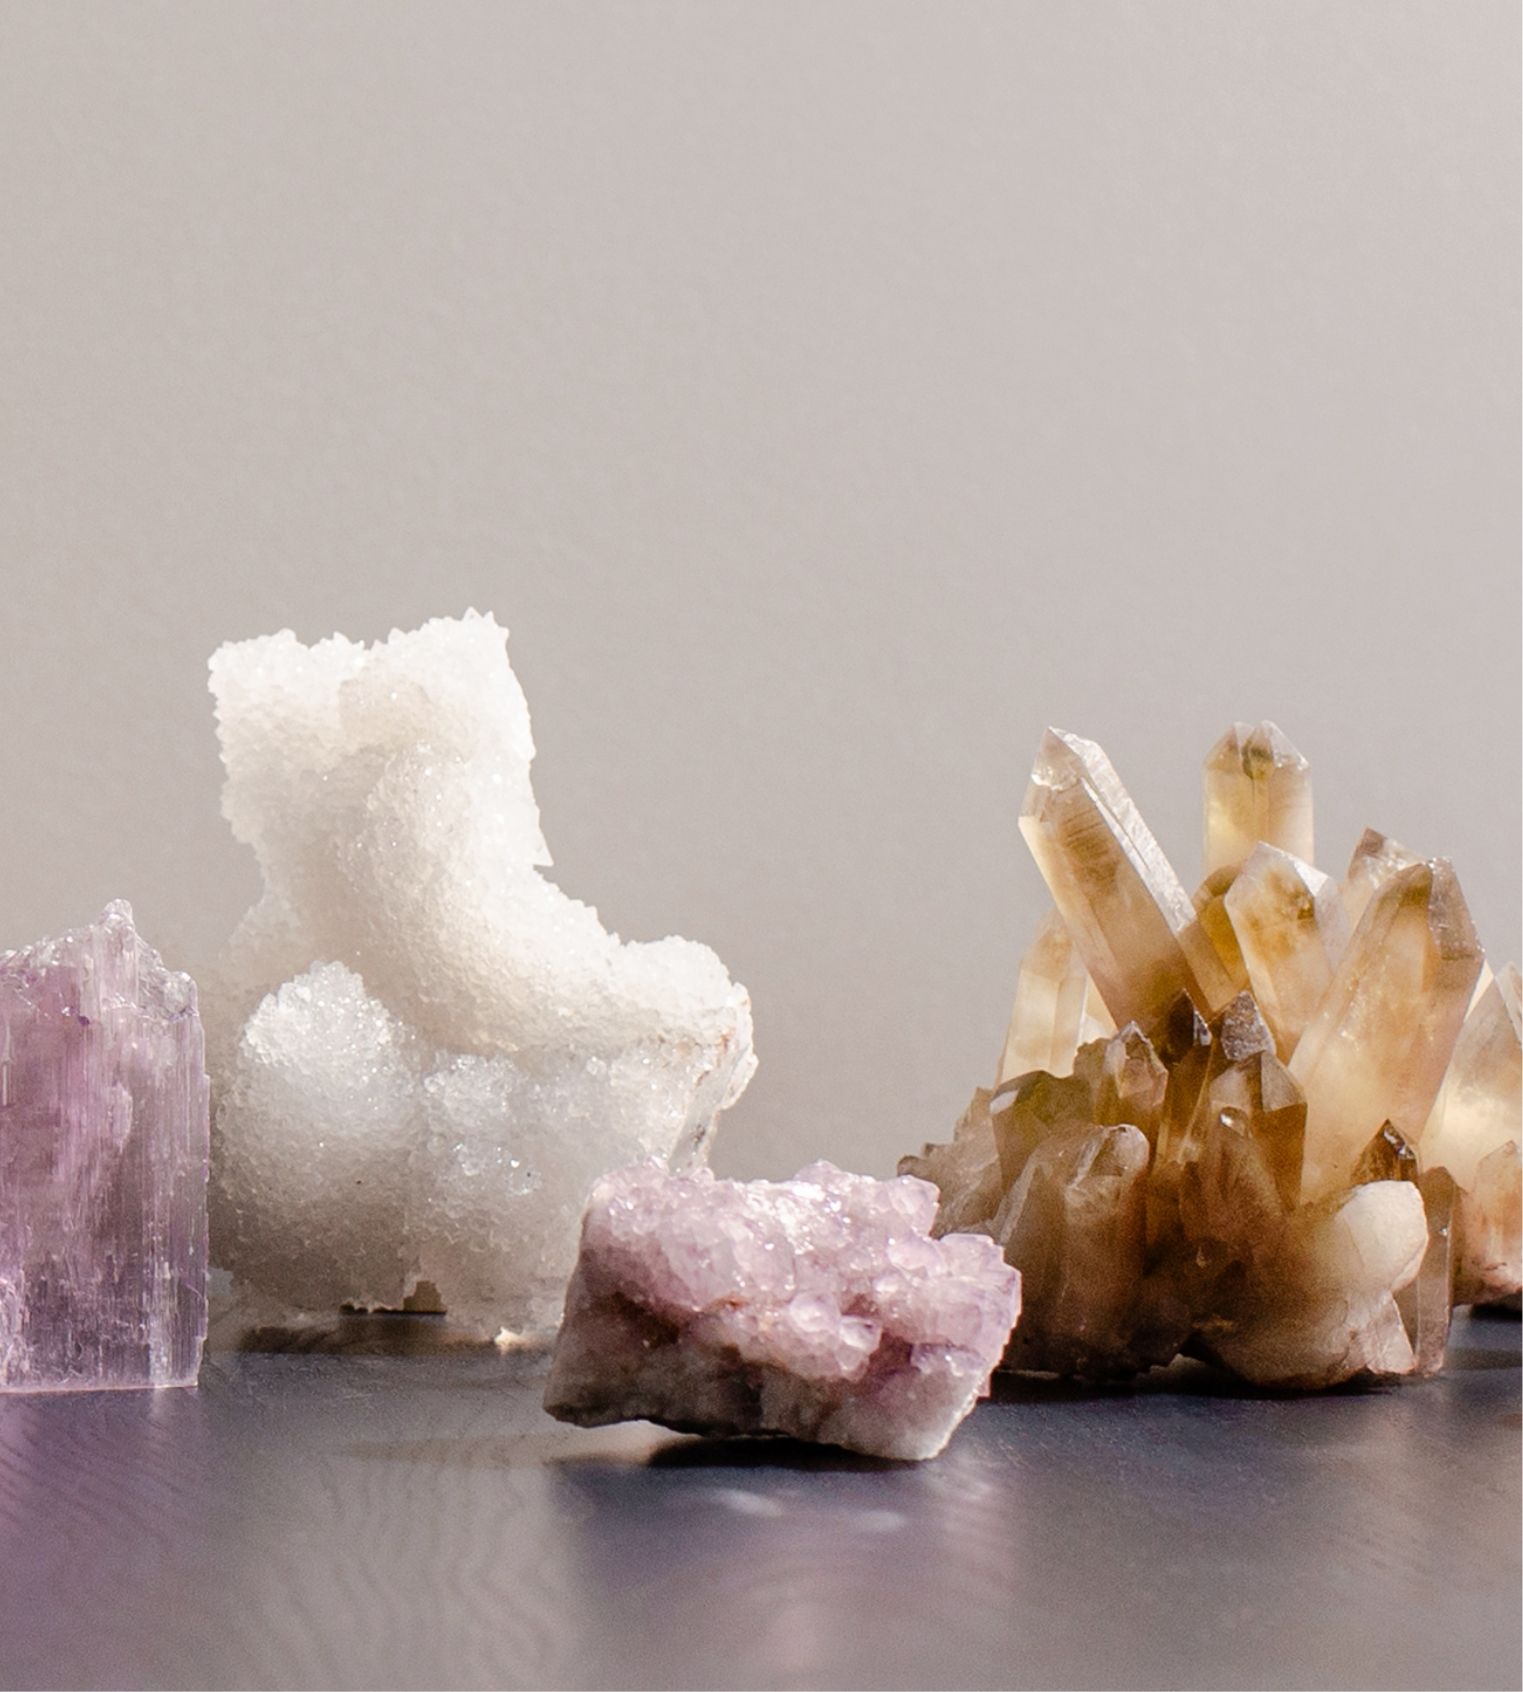 The New Moon’s Guide to Cleansing and Choosing crystals, still life photography by Amanda Kho of colourful crystals lined up on a table